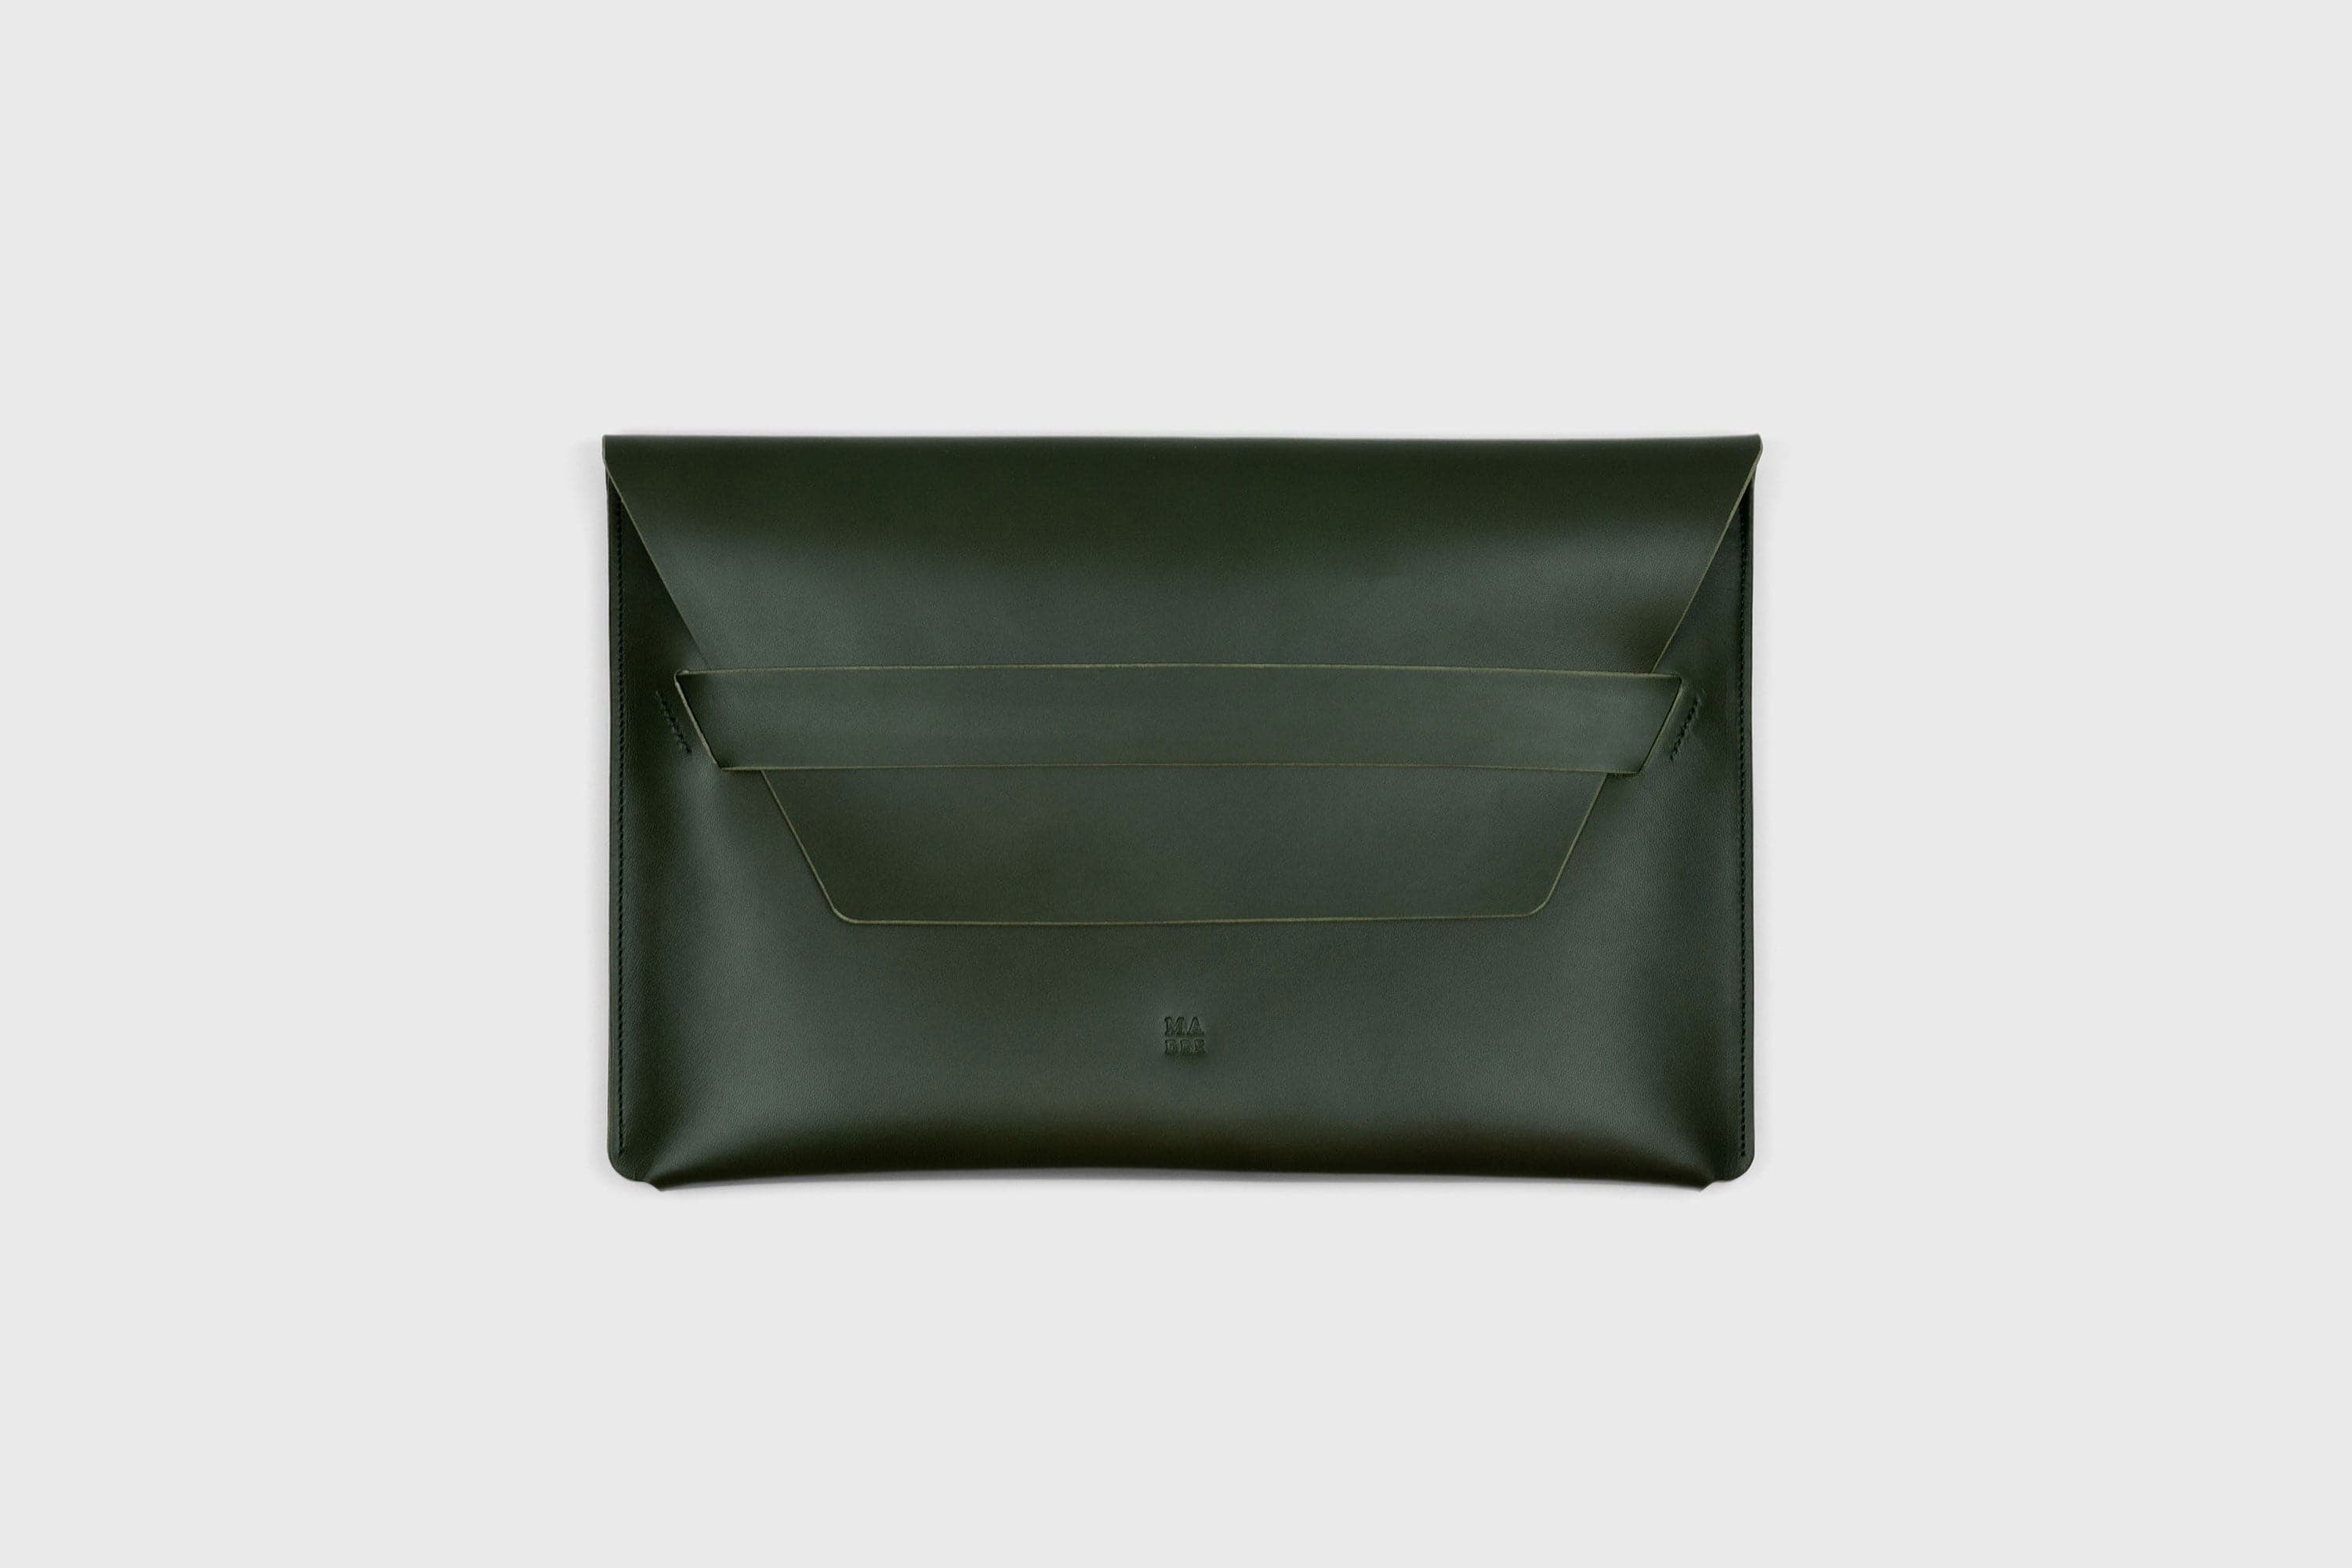 MacBook Pro 14 Inch Leather Sleeve Dark Olive Green Color Handmade and Designed By Manuel Dreesmann Atelier Madre Barcelona Spain